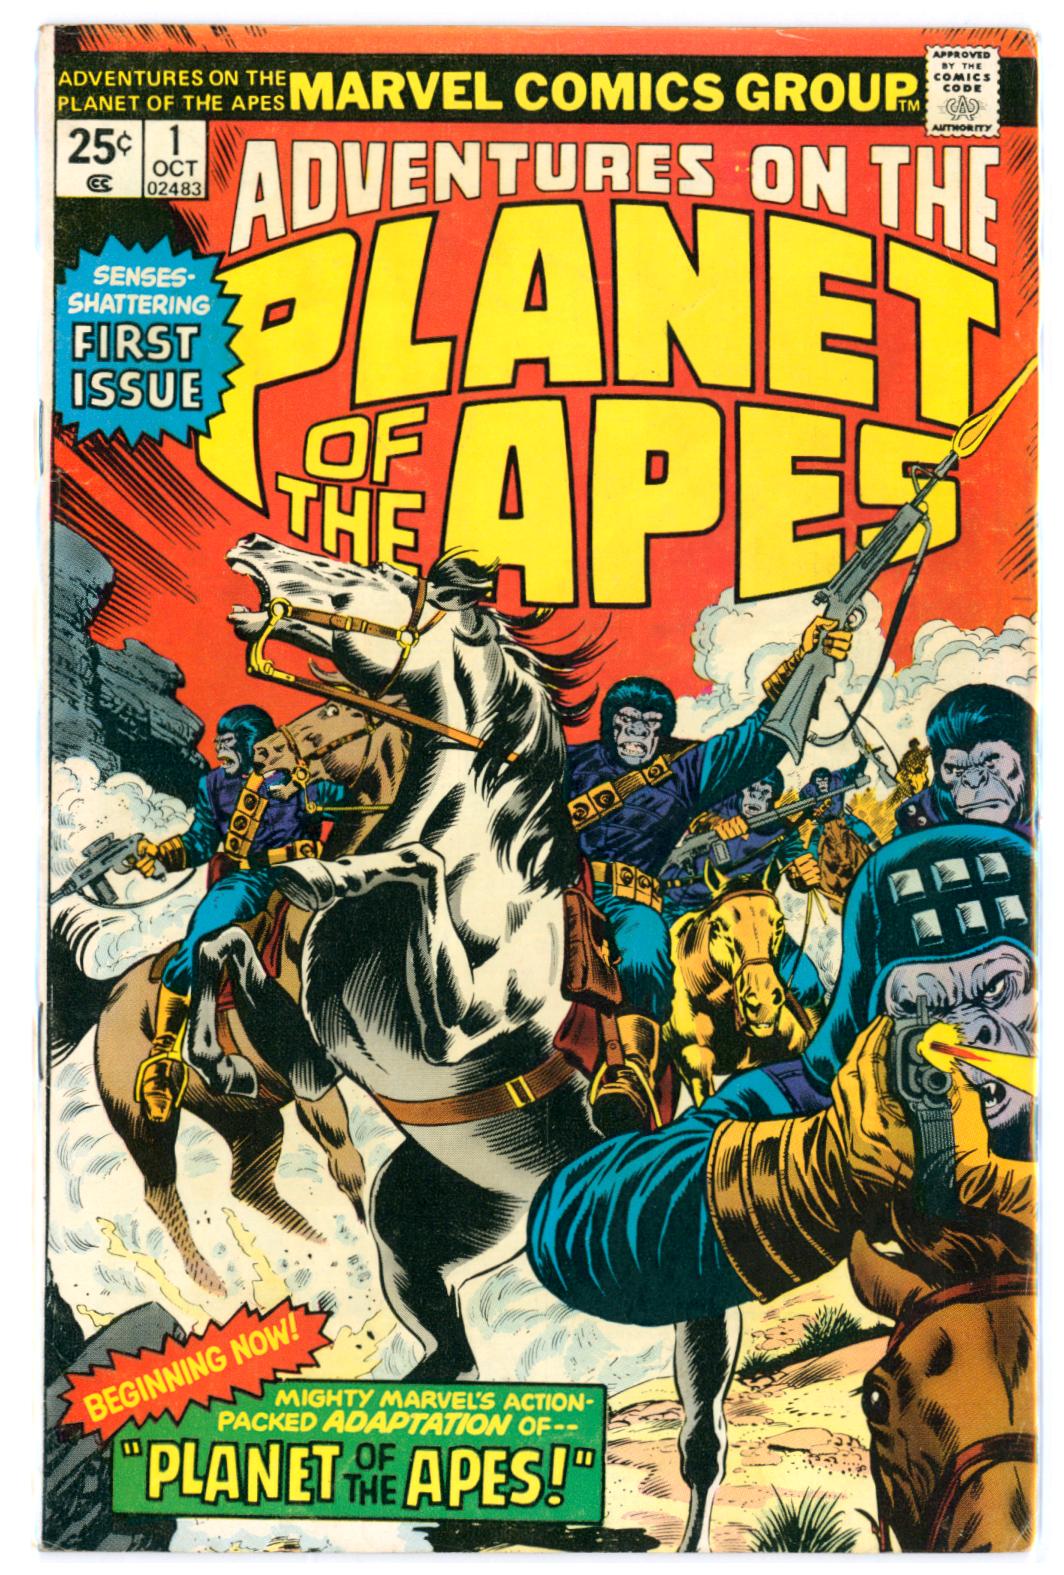 Adventures on the Planet of the Apes #1